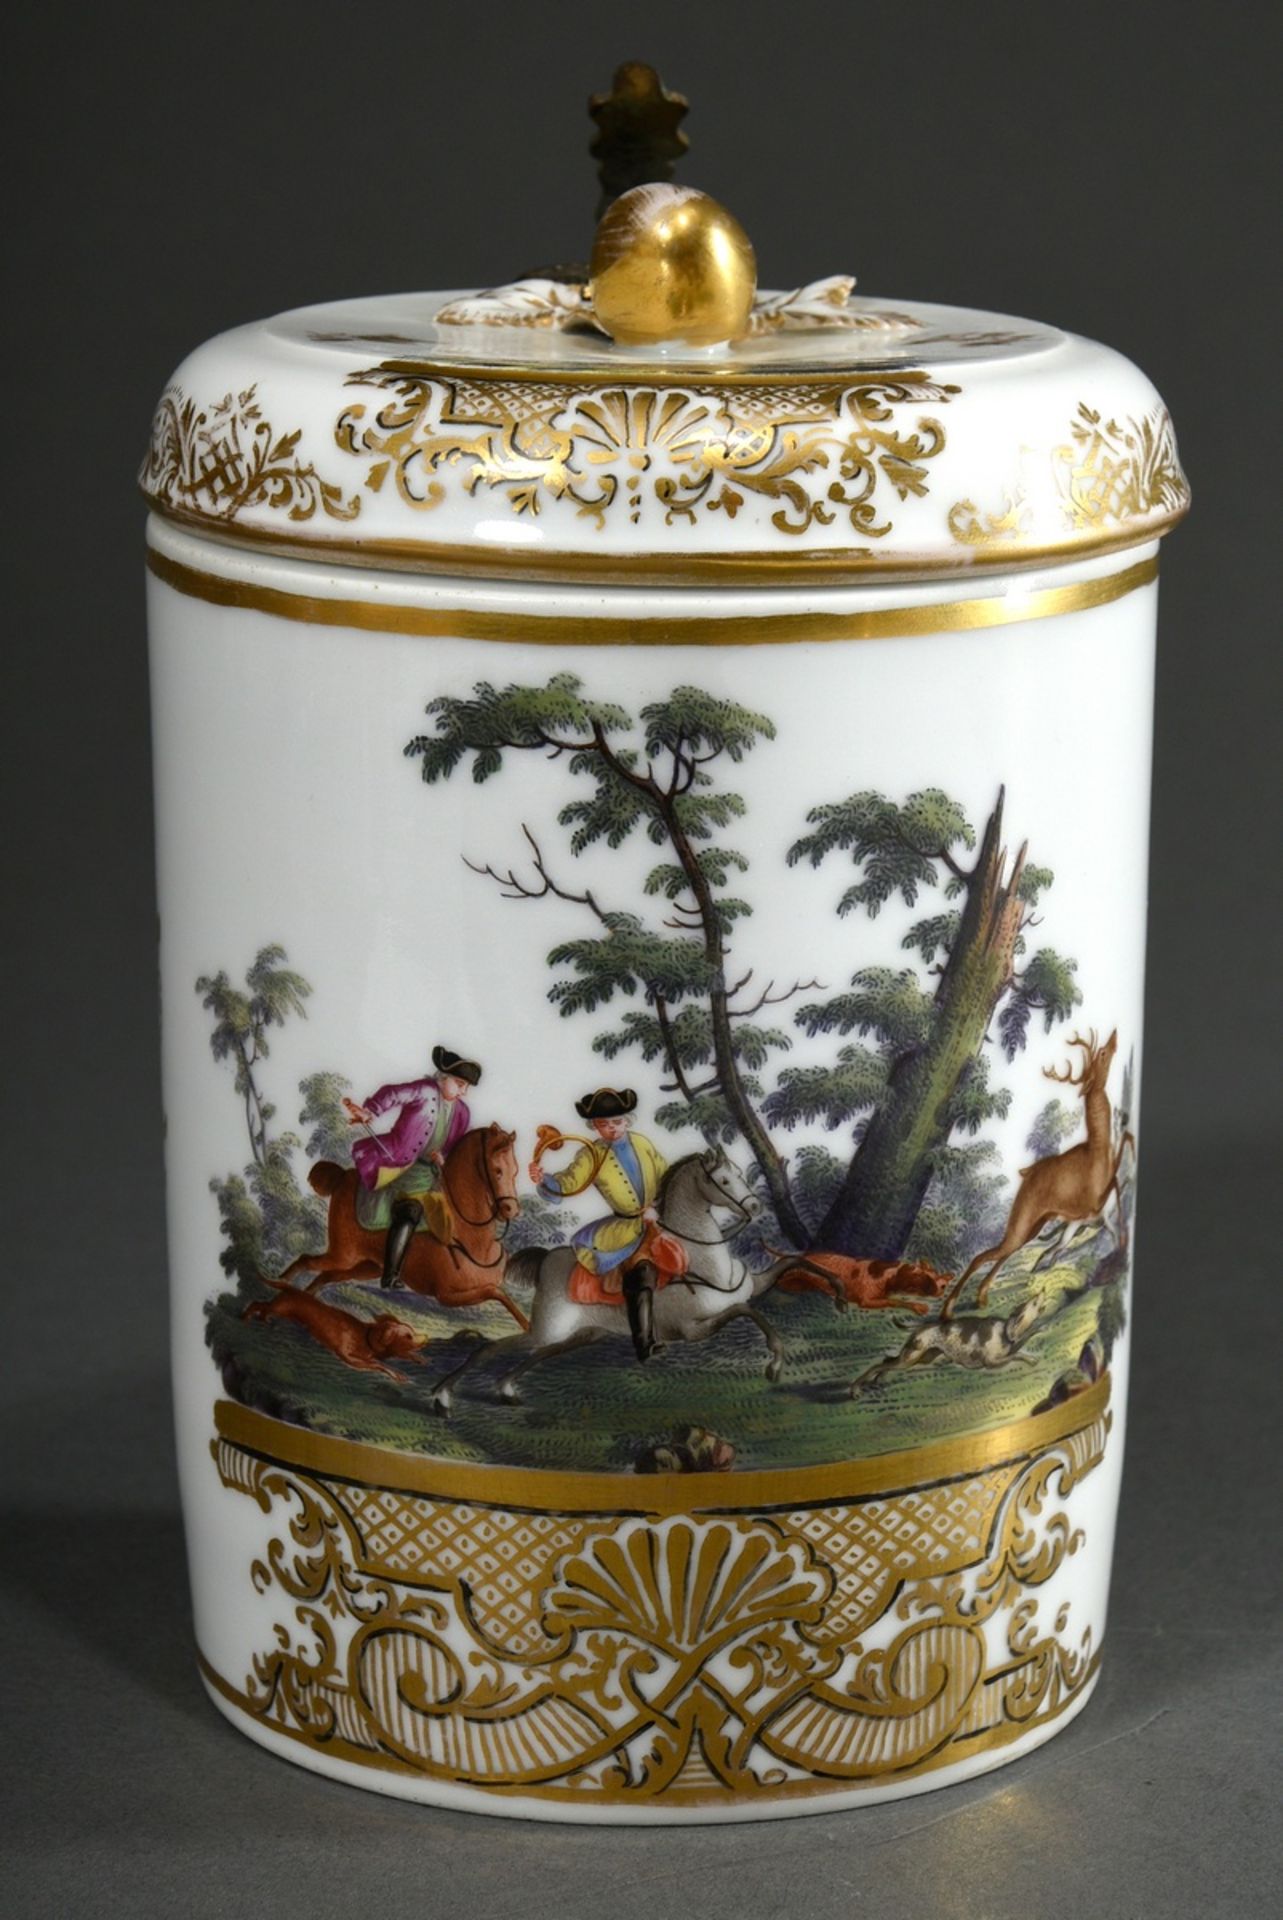 Porcelain cylindrical jug with polychrome scenes "Hirschhatz und Jäger" on the front and body as we